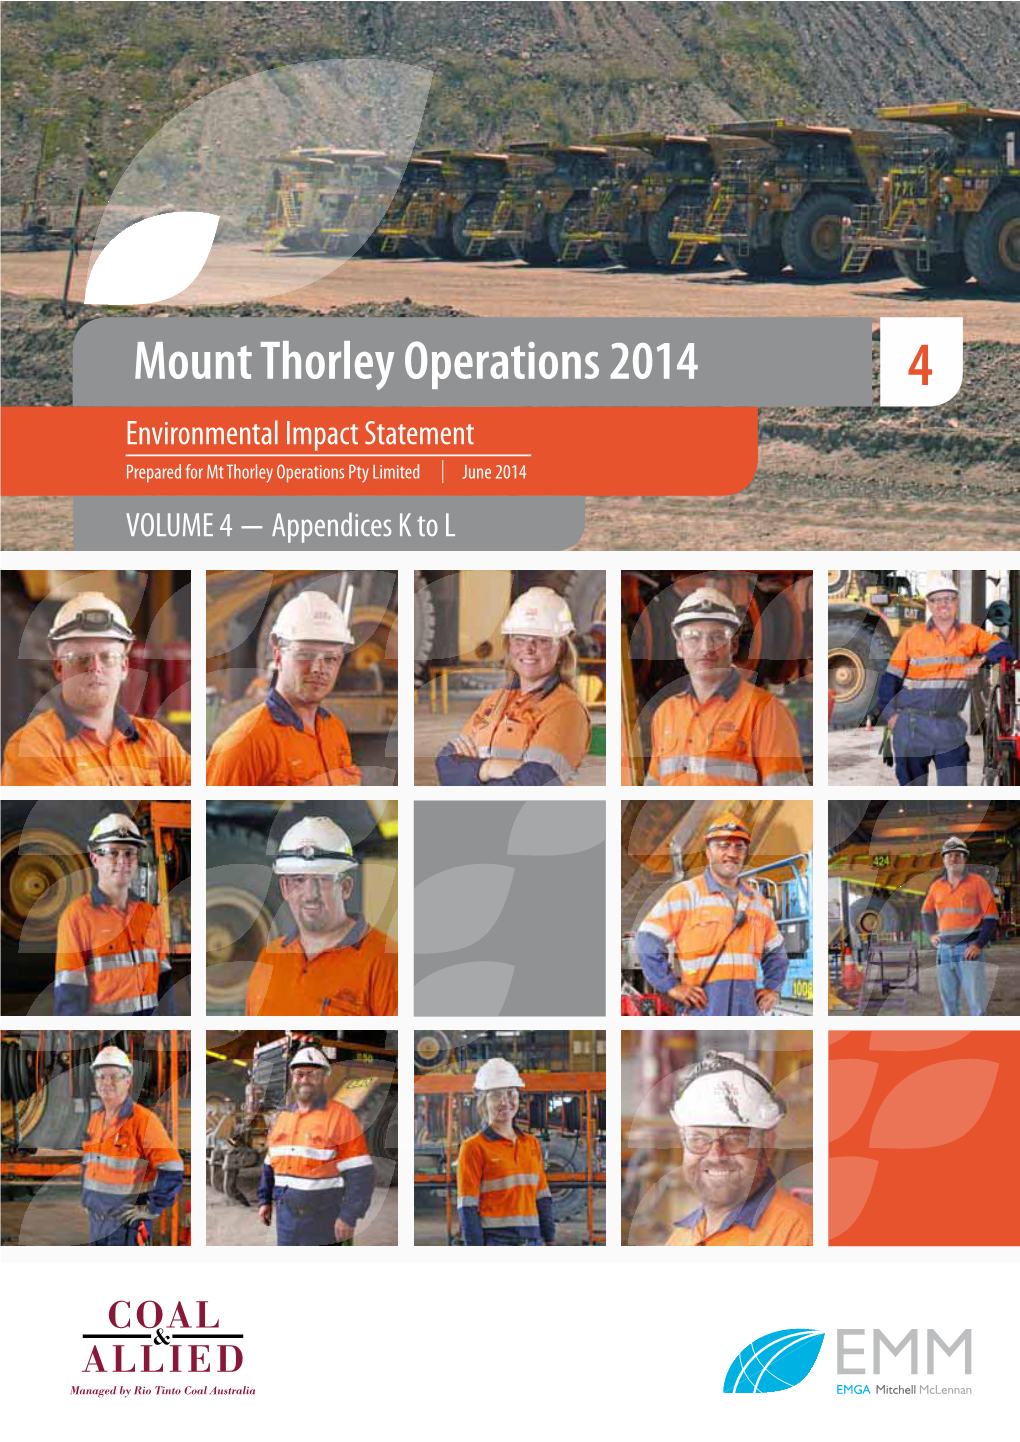 Mount Thorley Operations 2014